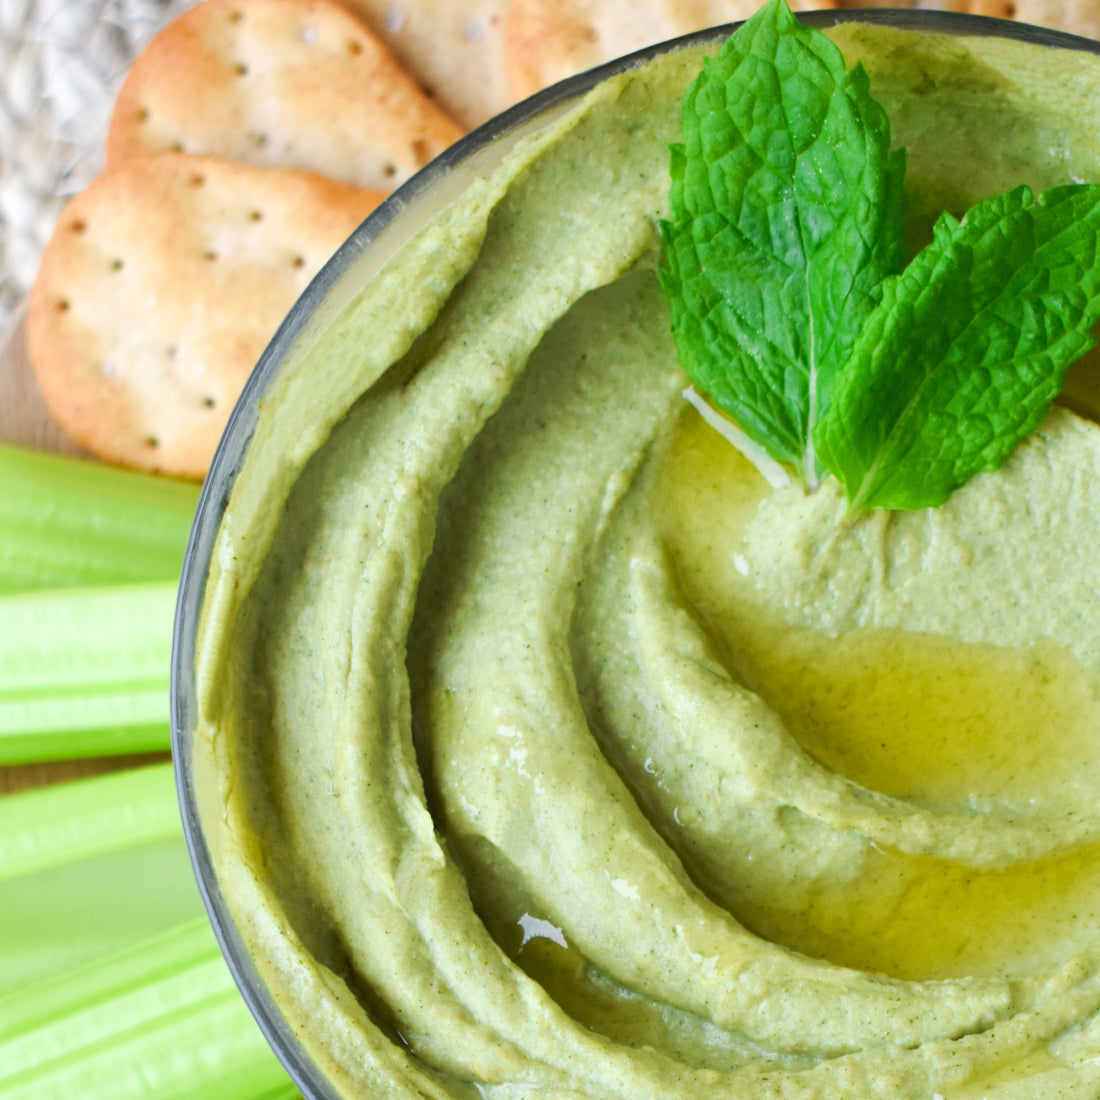 Hummus with green superfood from healthbrand KIANO